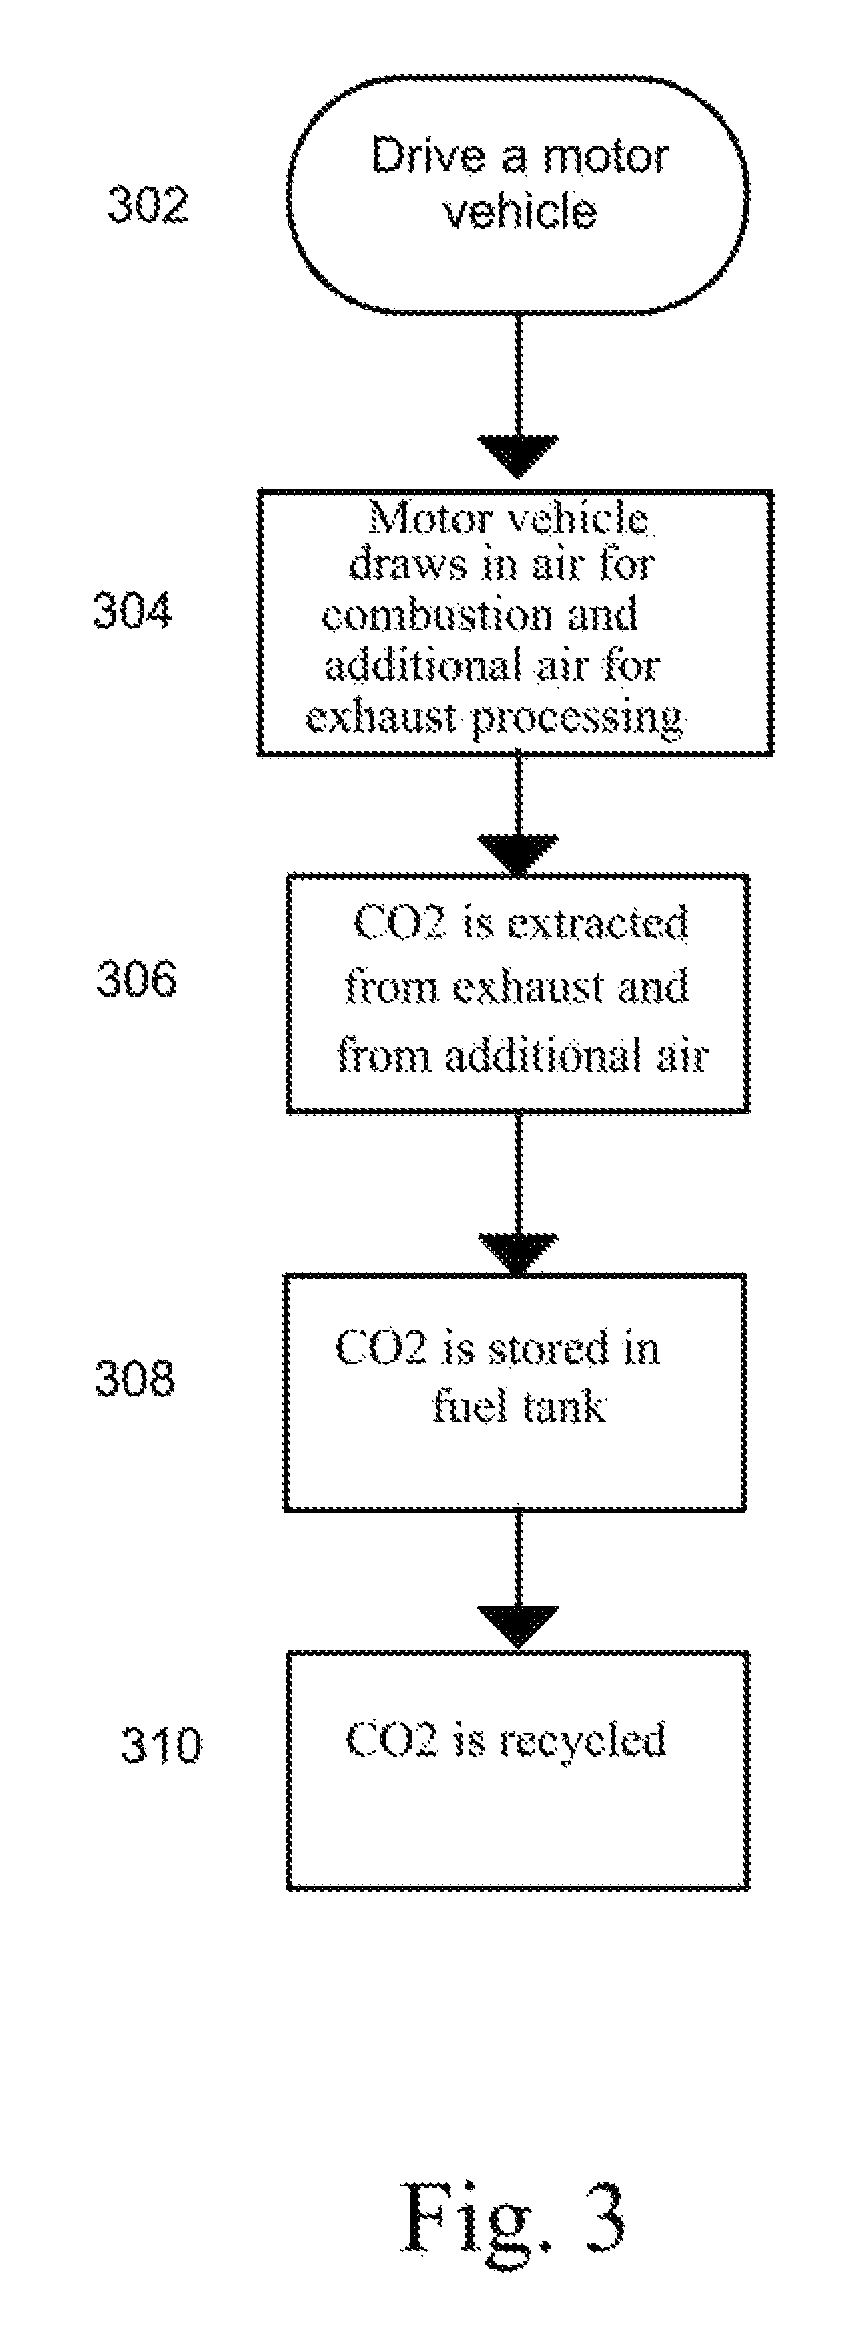 Fuel tank with carbon dioxide storage